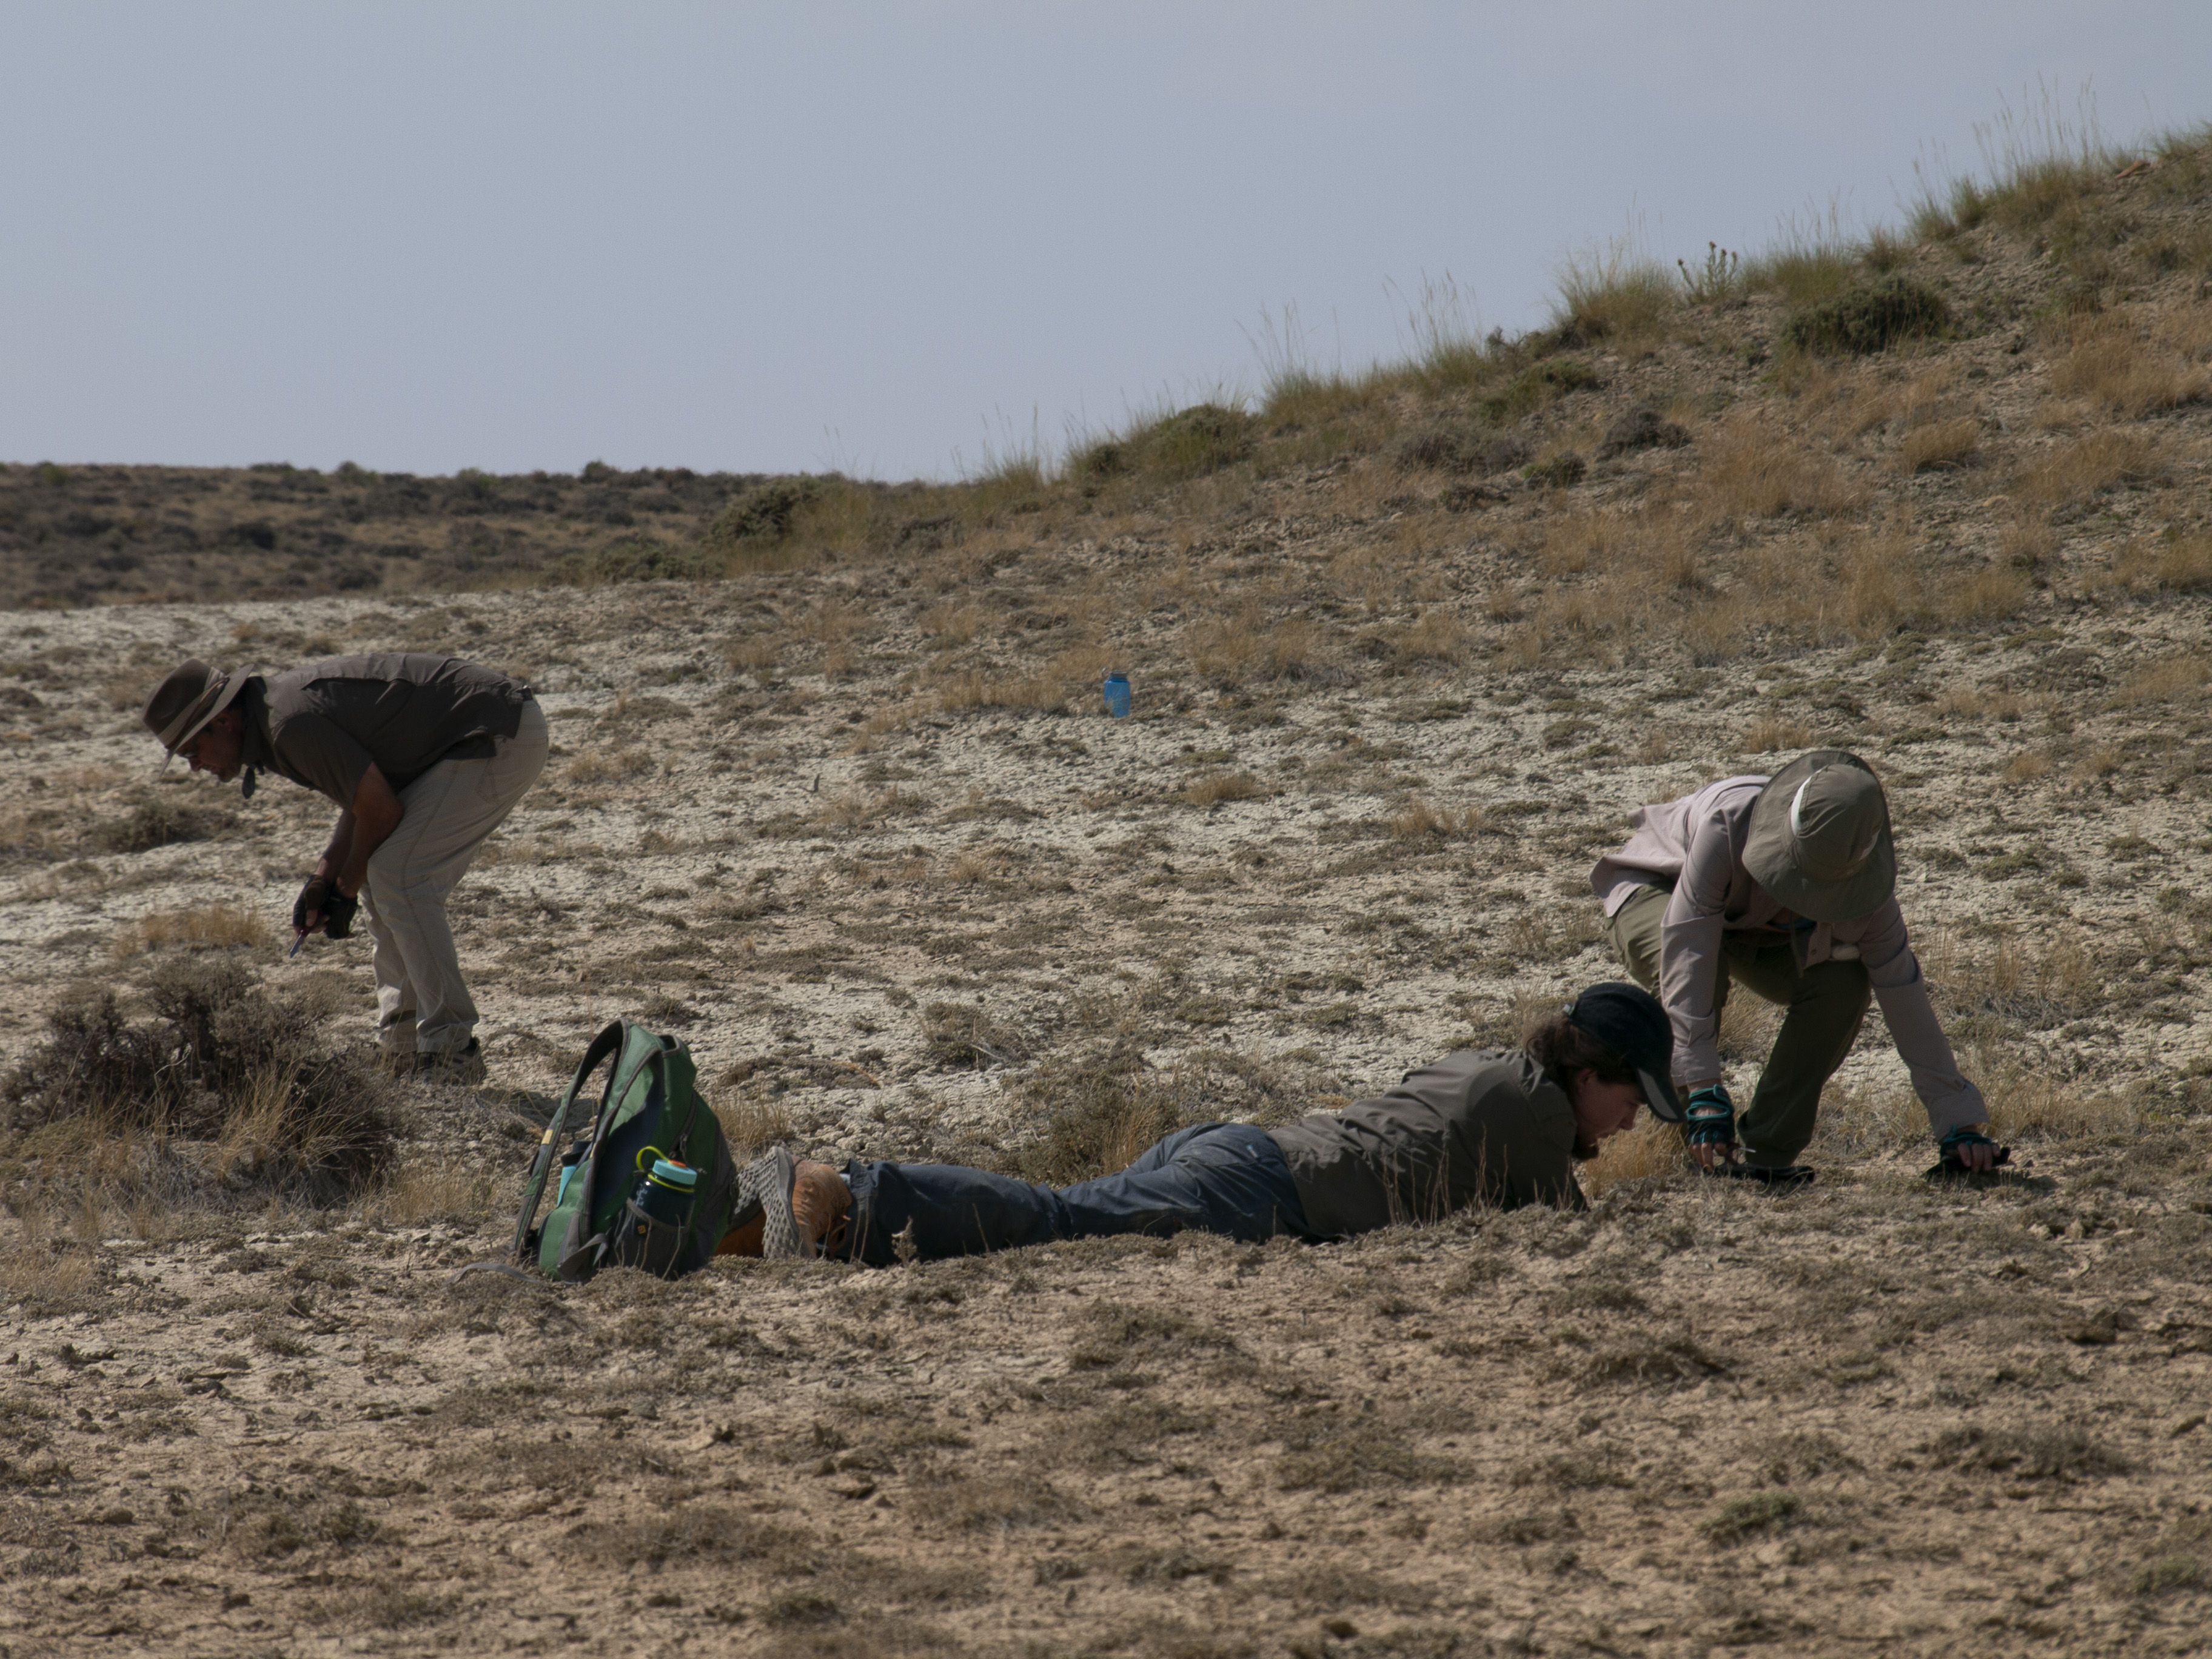 Christopher Beard, Kristen Mill and Kathleen Rust dig in the dirt in Wyoming to uncover fossils.